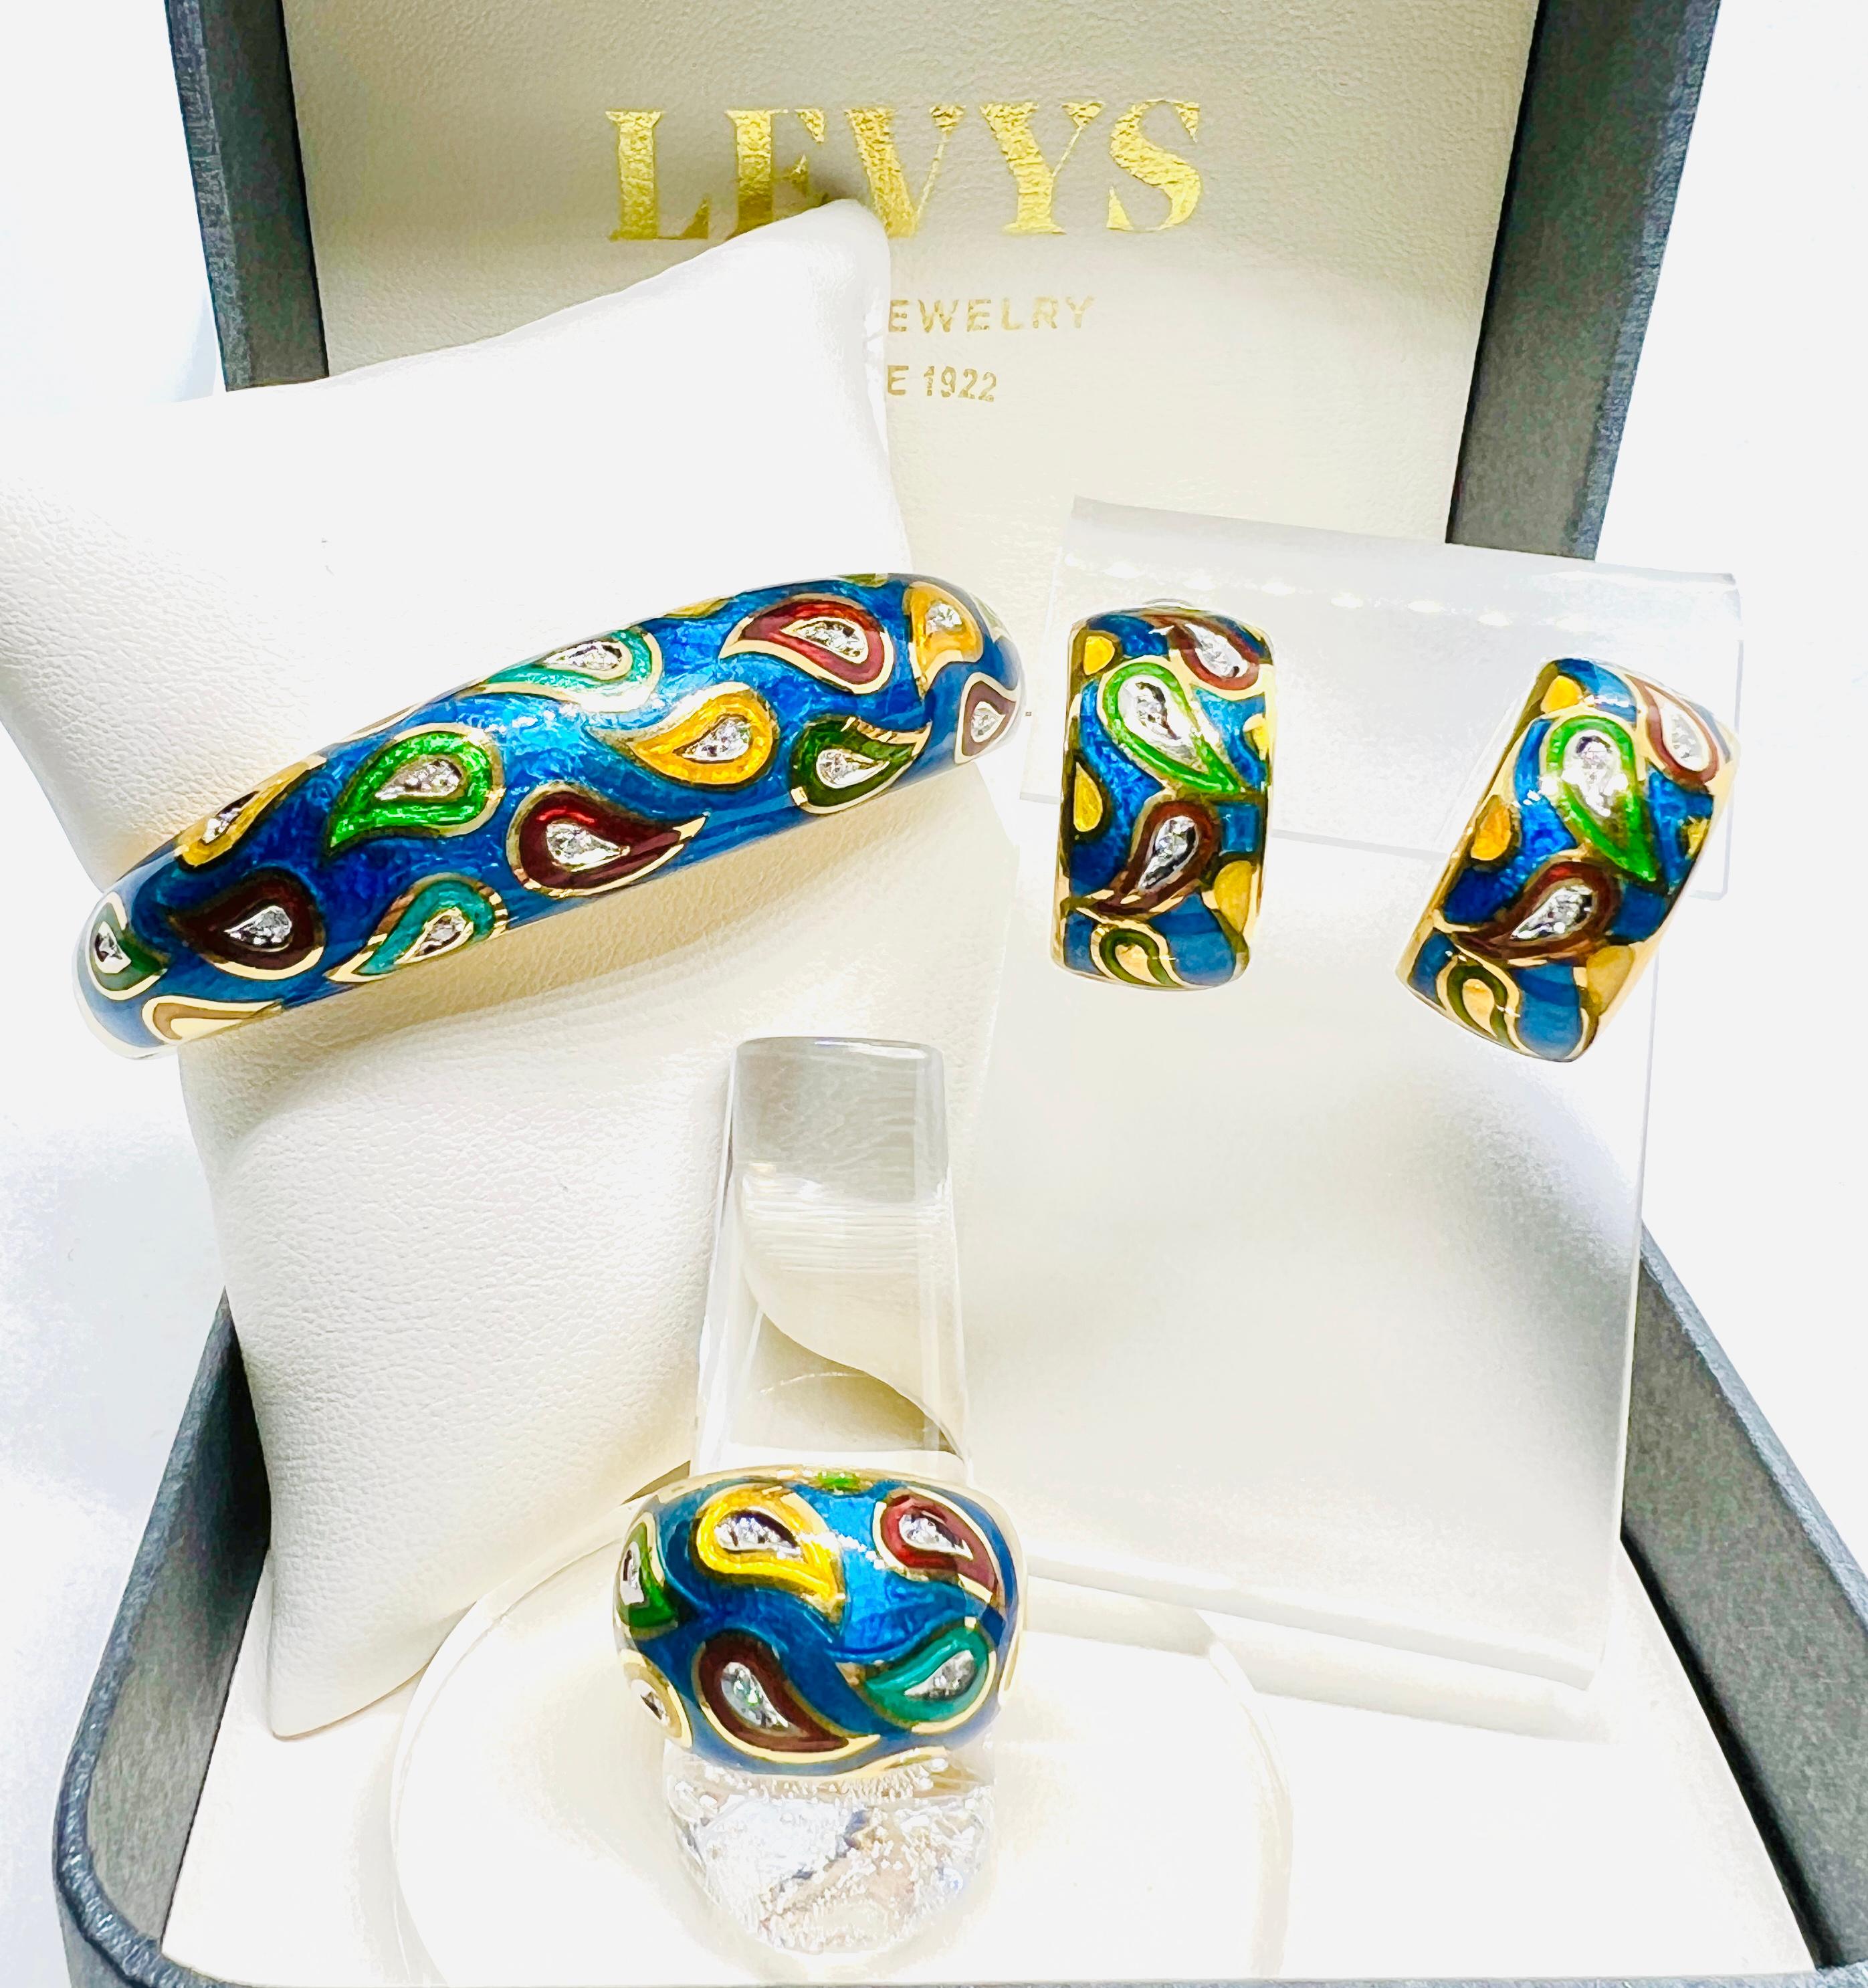 This is a gorgeous suite! Made in 18k yellow gold and features multi colored enamel (blue, green, yellow and red) in a paisley pattern. The ring is a size 7.5, features 6 diamonds and weighs 13.6 grams. The earrings measure 1 inch by 1/2 inch, have